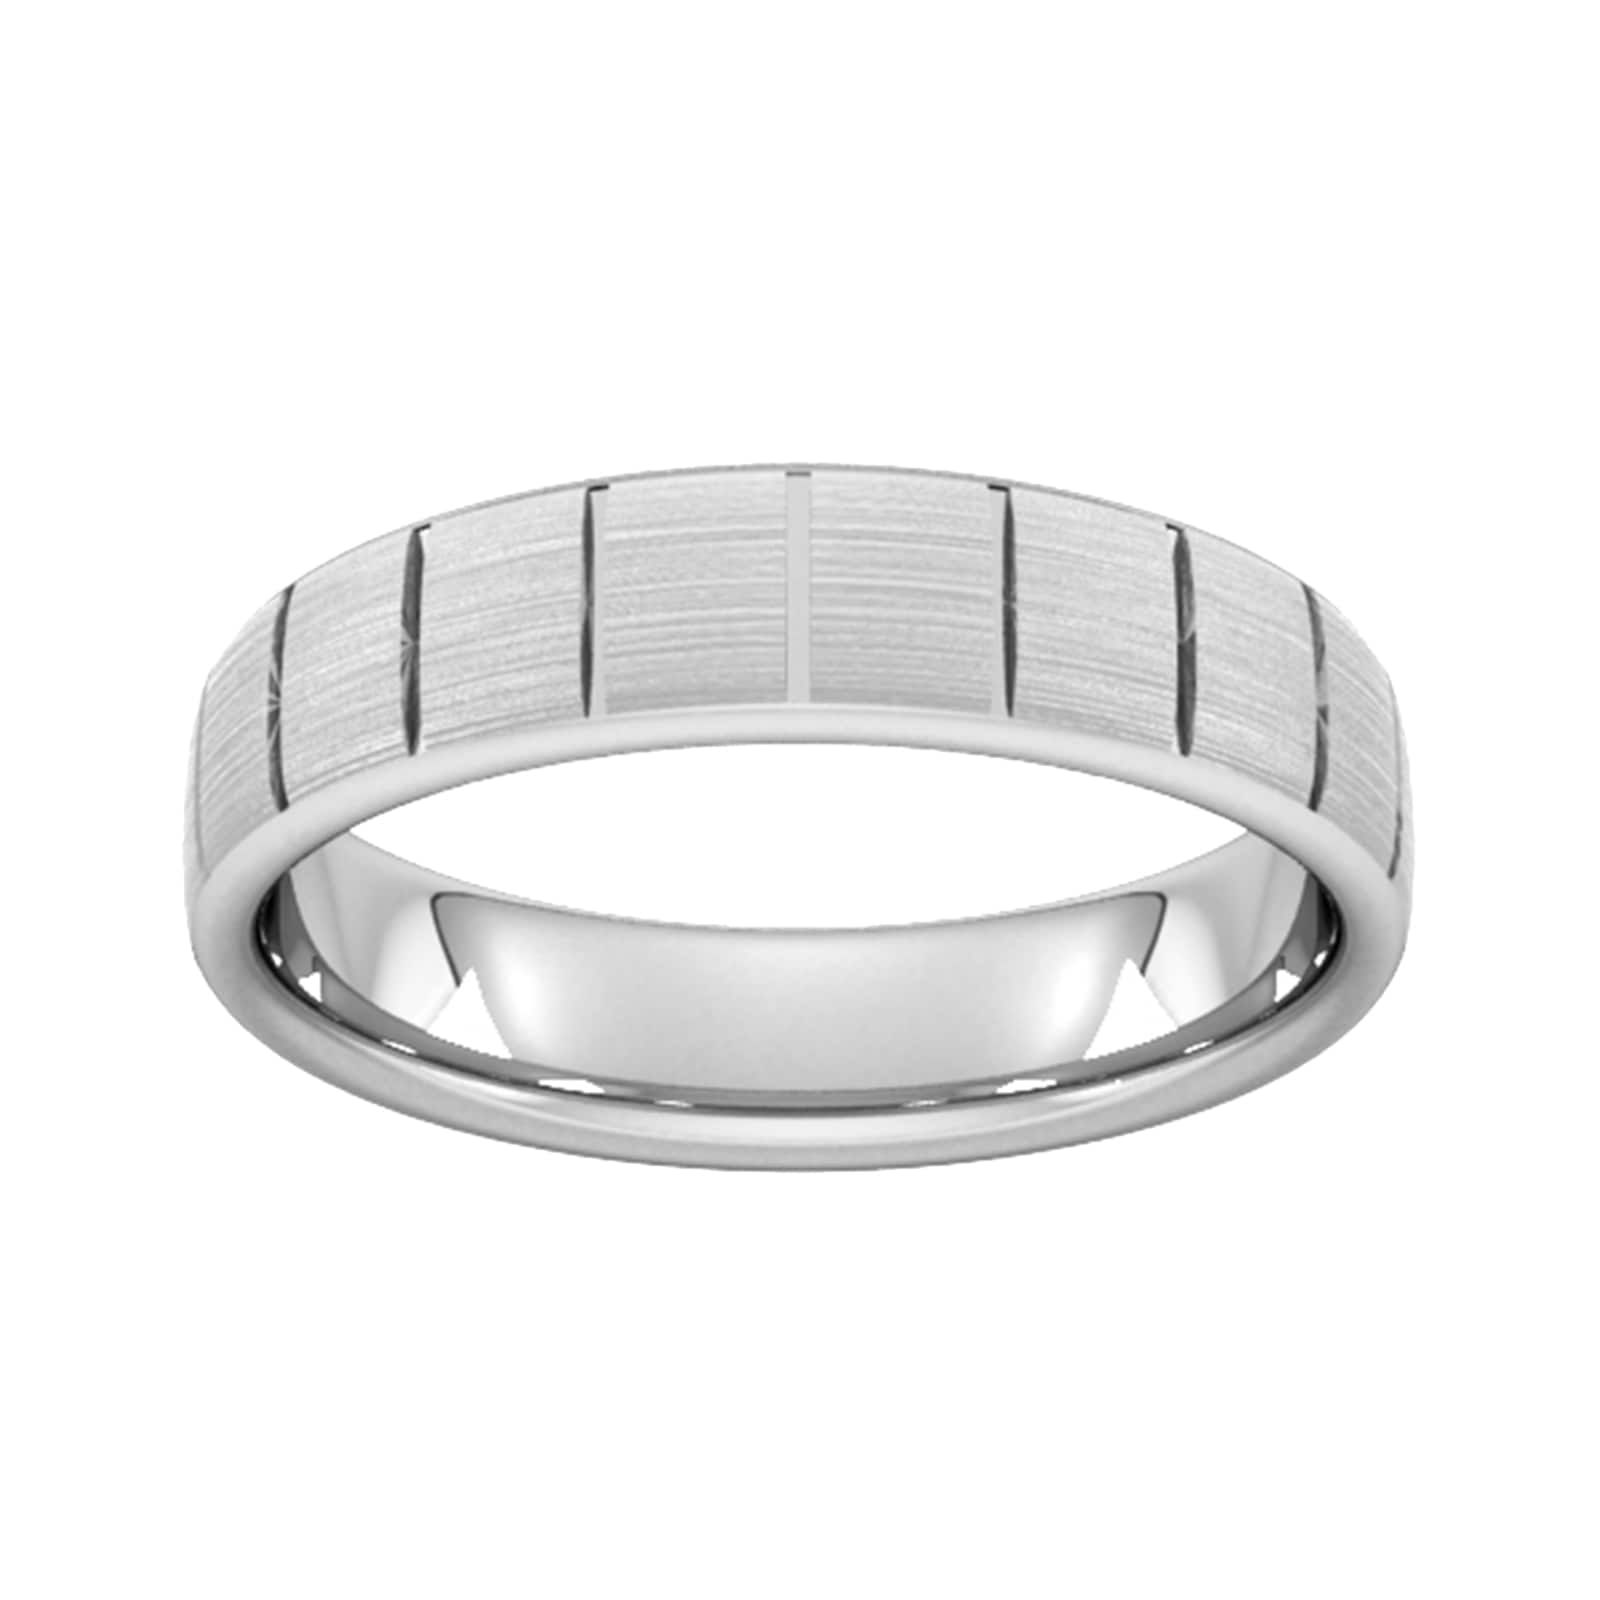 5mm slight court heavy vertical lines wedding ring in 9 carat white gold - ring size s